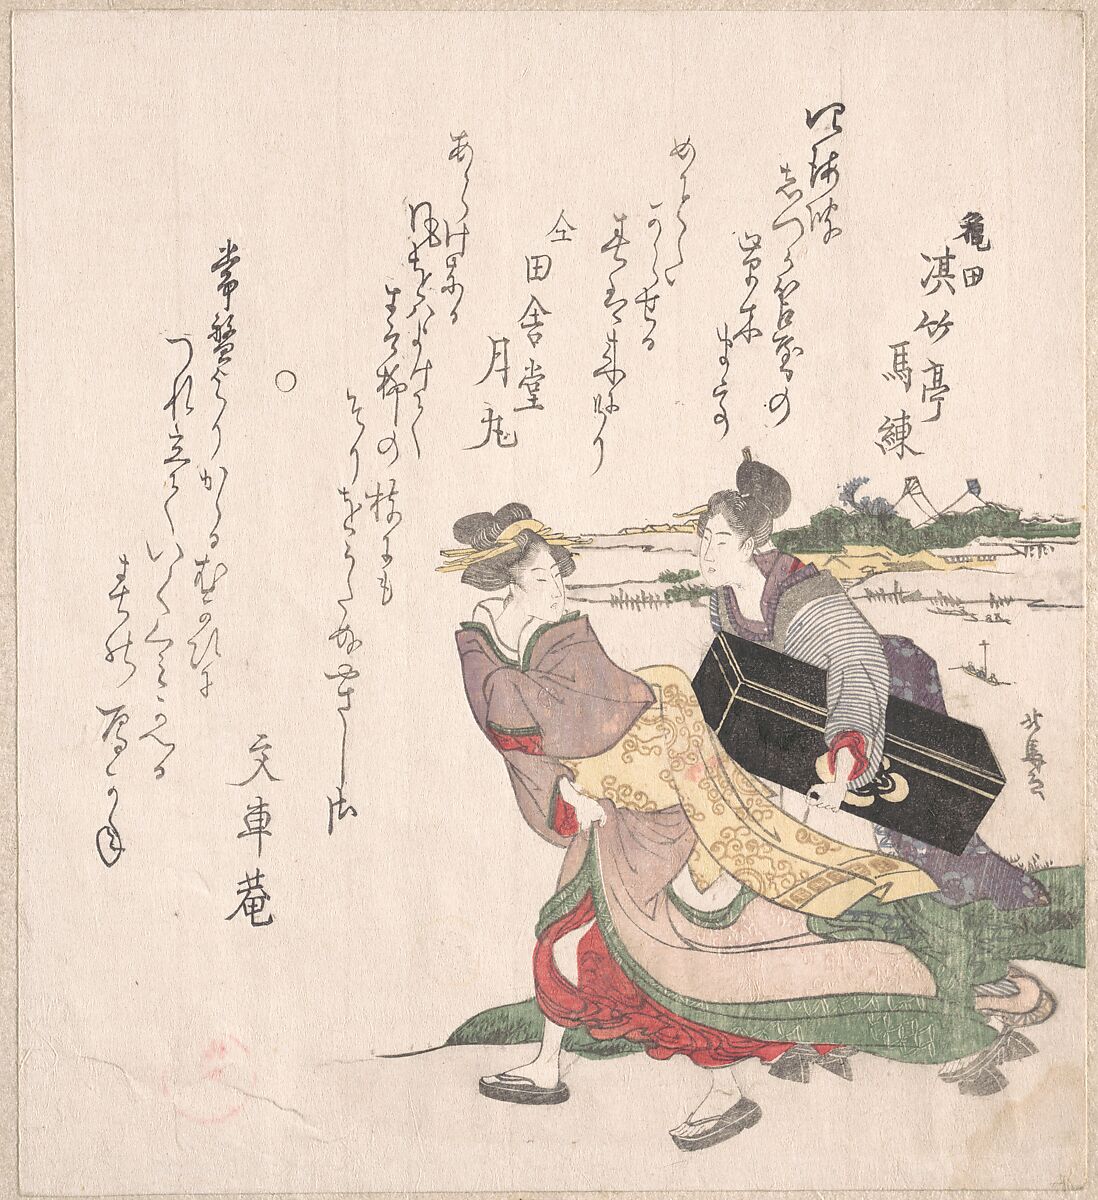 Geisha Girl Hurrying with a Maid Servant Who is Carrying a Shamisen Box, Teisai Hokuba (Japanese, 1771–1844), Woodblock print (surimono); ink and color on paper, Japan 